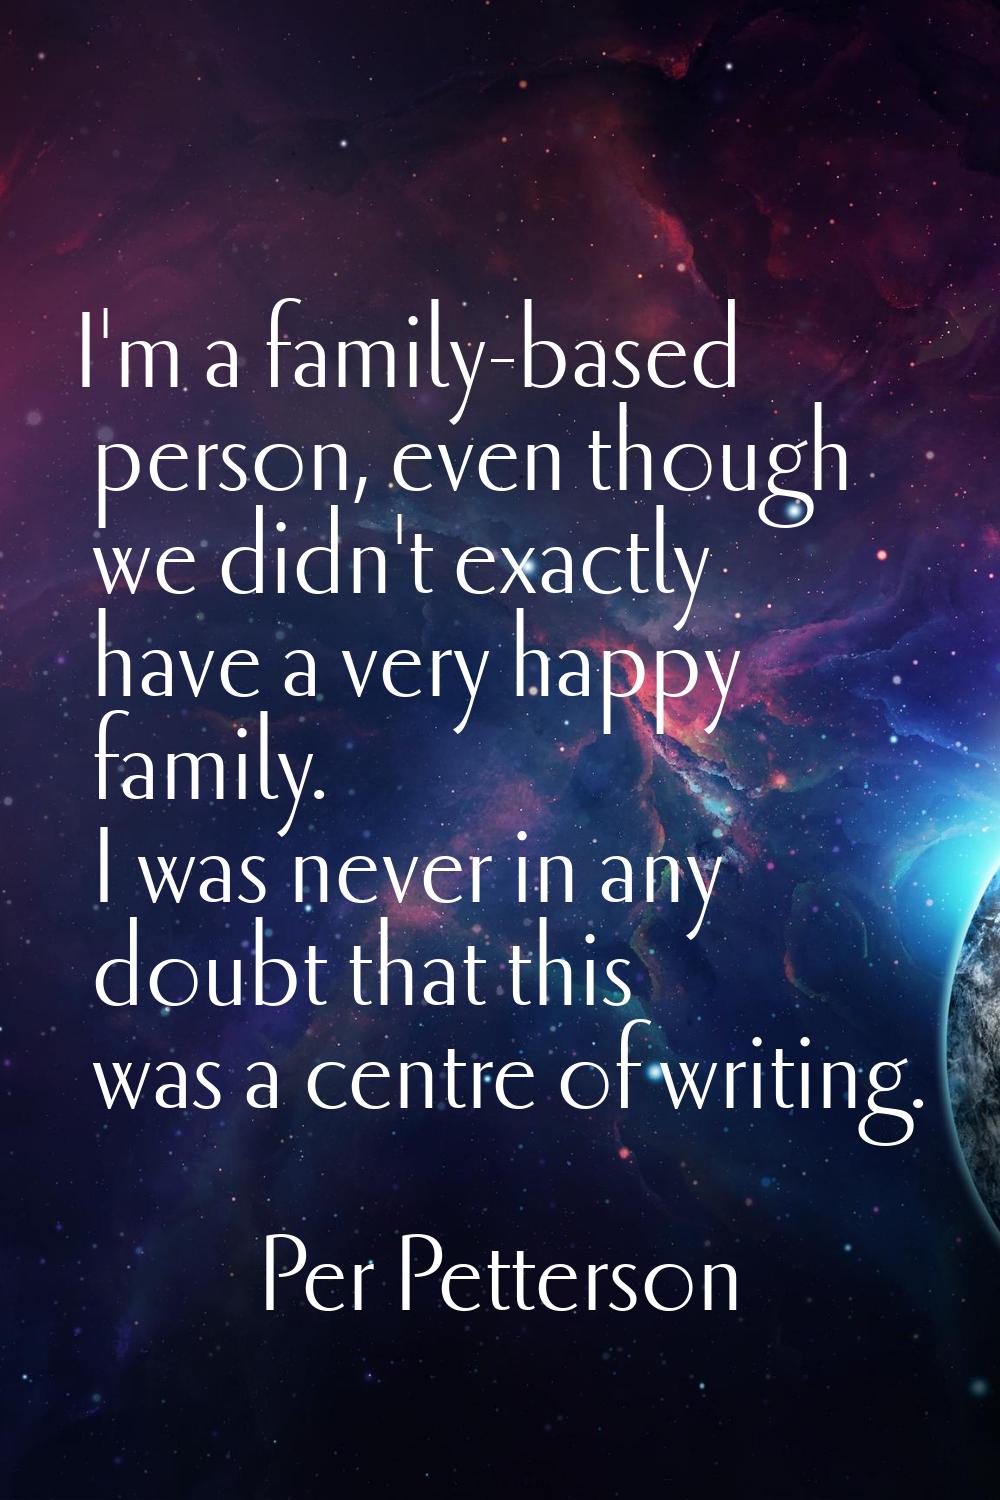 I'm a family-based person, even though we didn't exactly have a very happy family. I was never in a